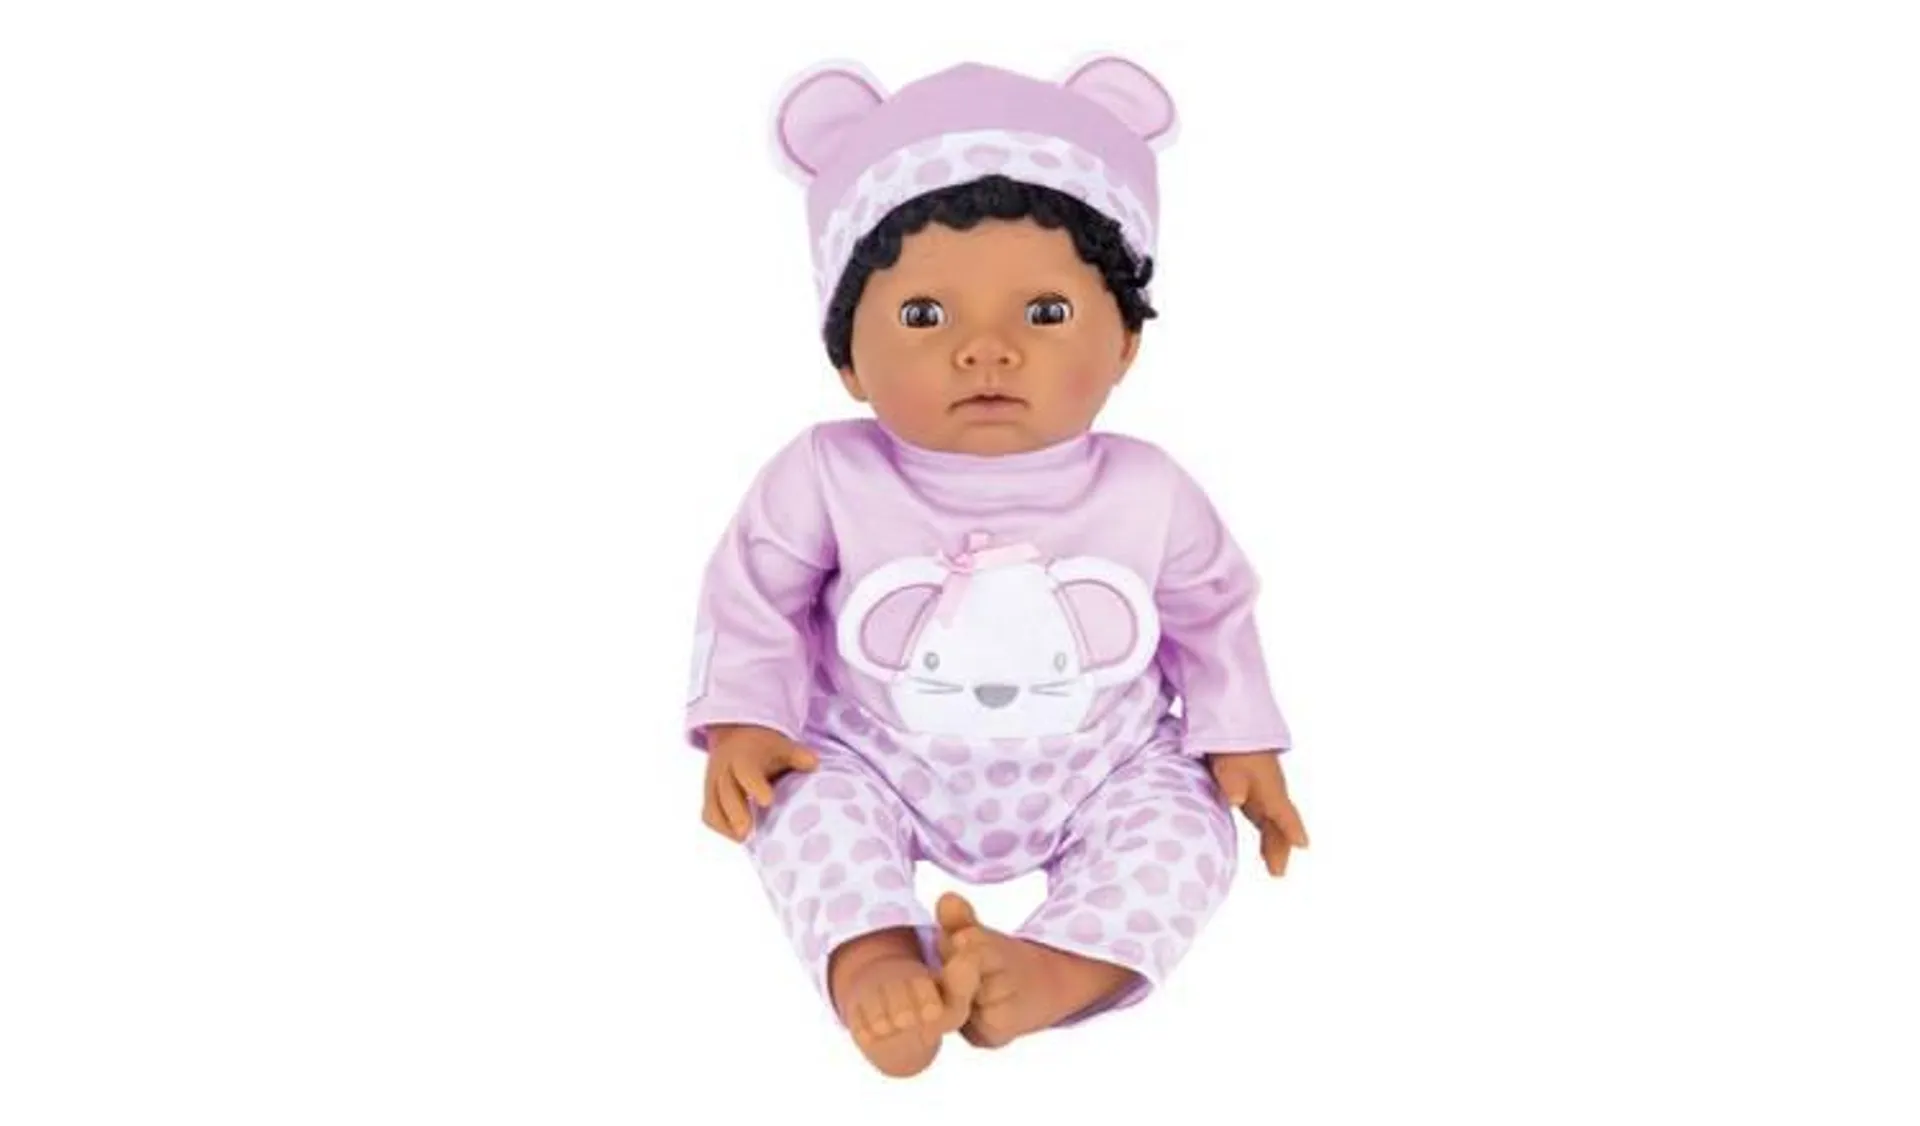 Tiny Treasures Doll in Purple Mouse Outfit - 17inch/44cm